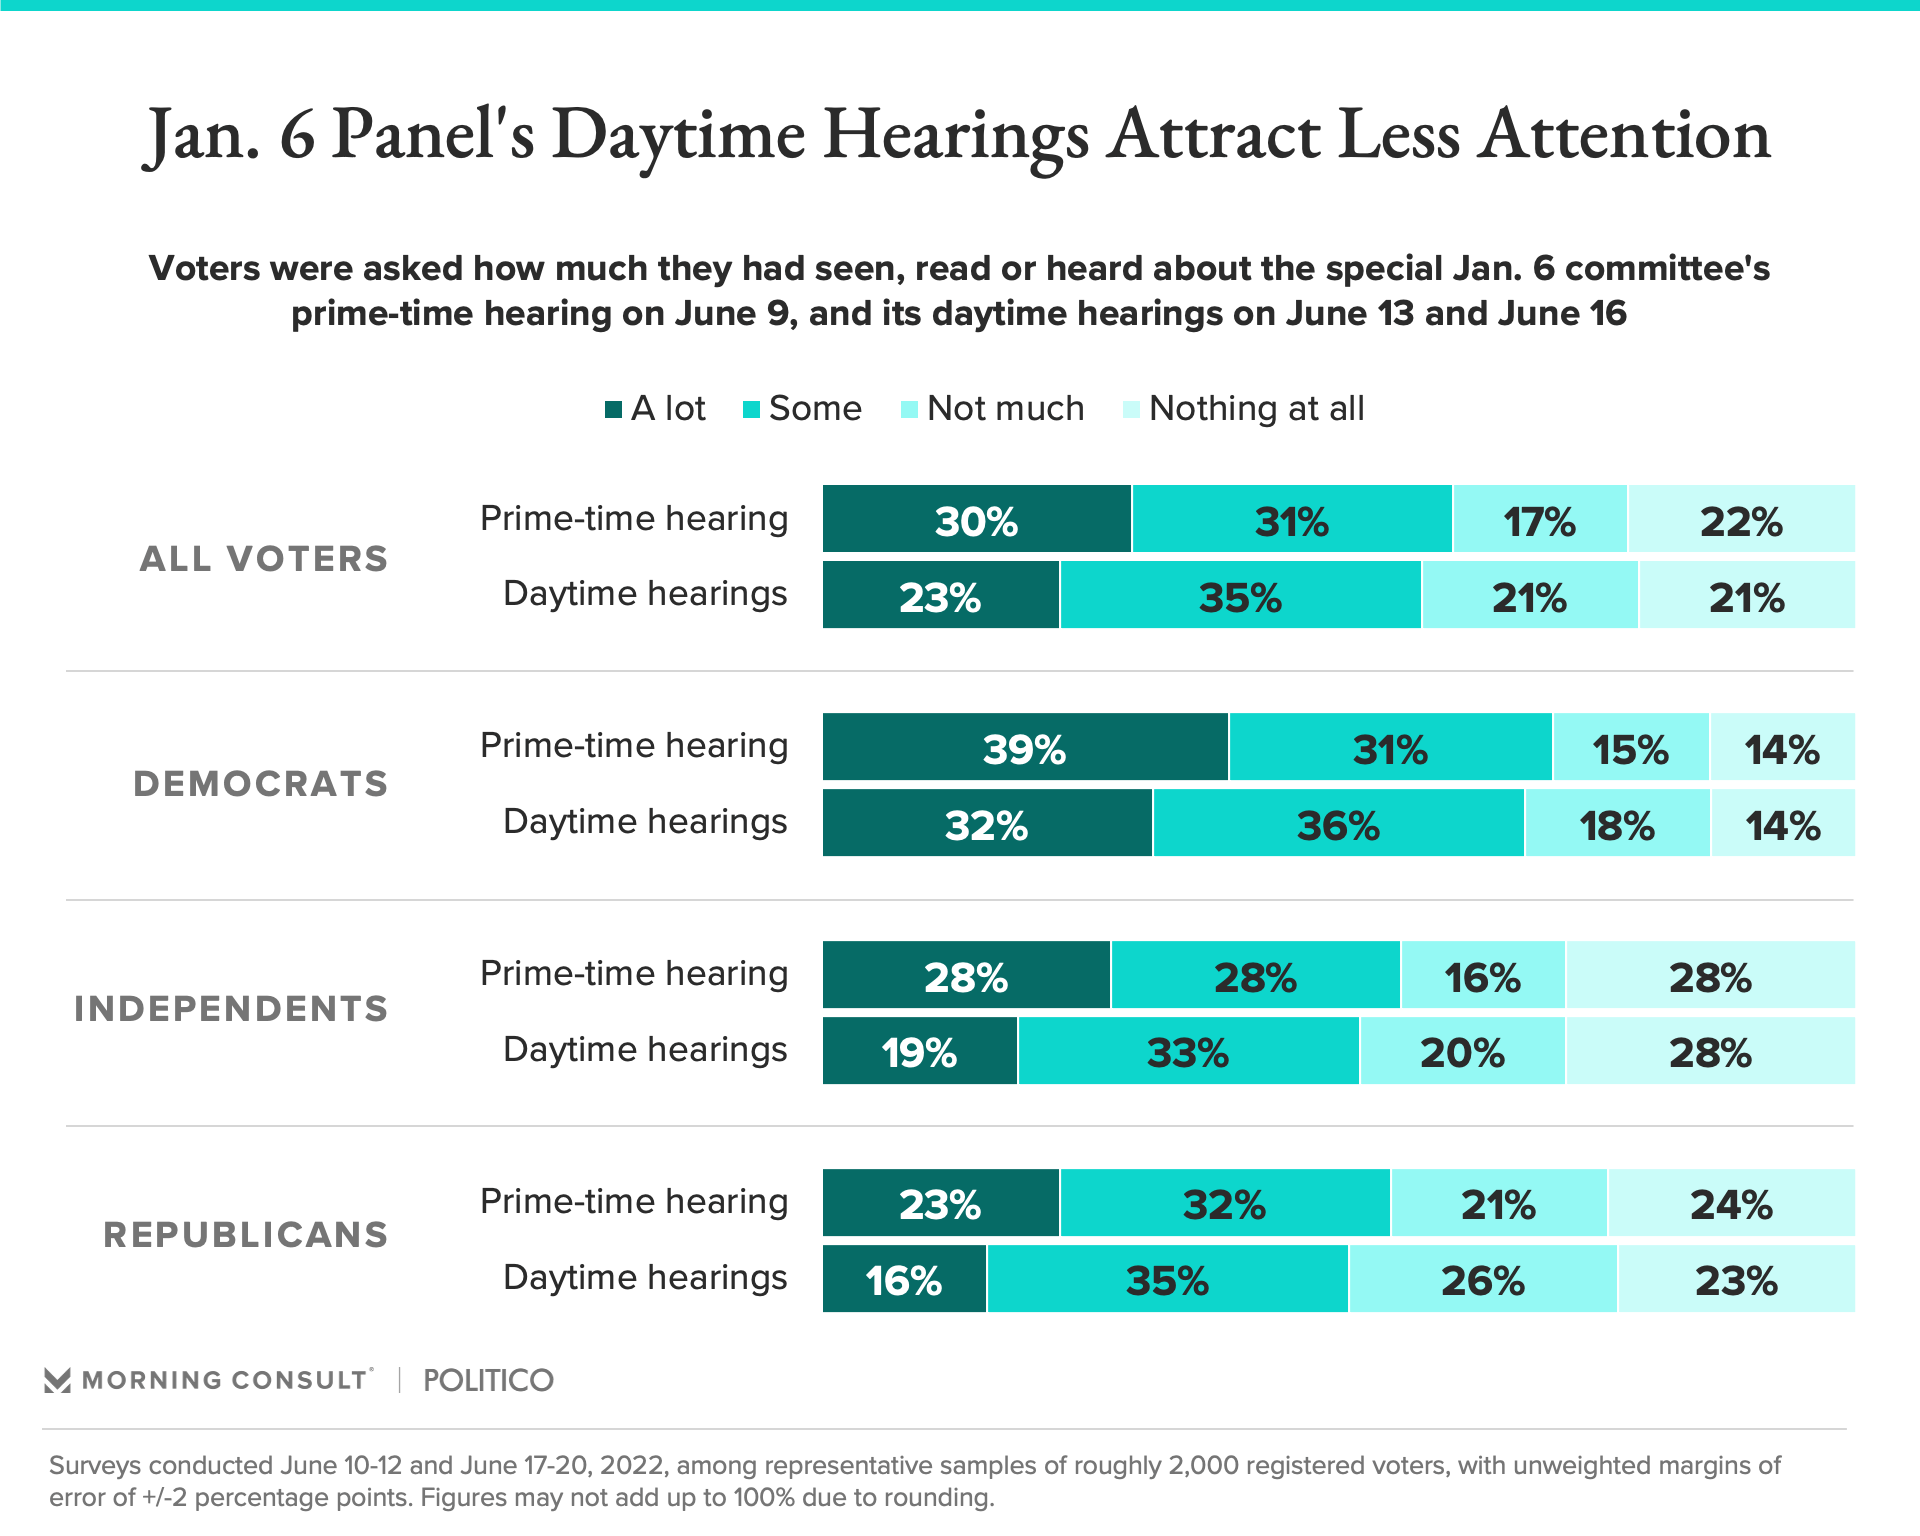 Bar chart showing that Jan. 6 daytime hearings attract less attention